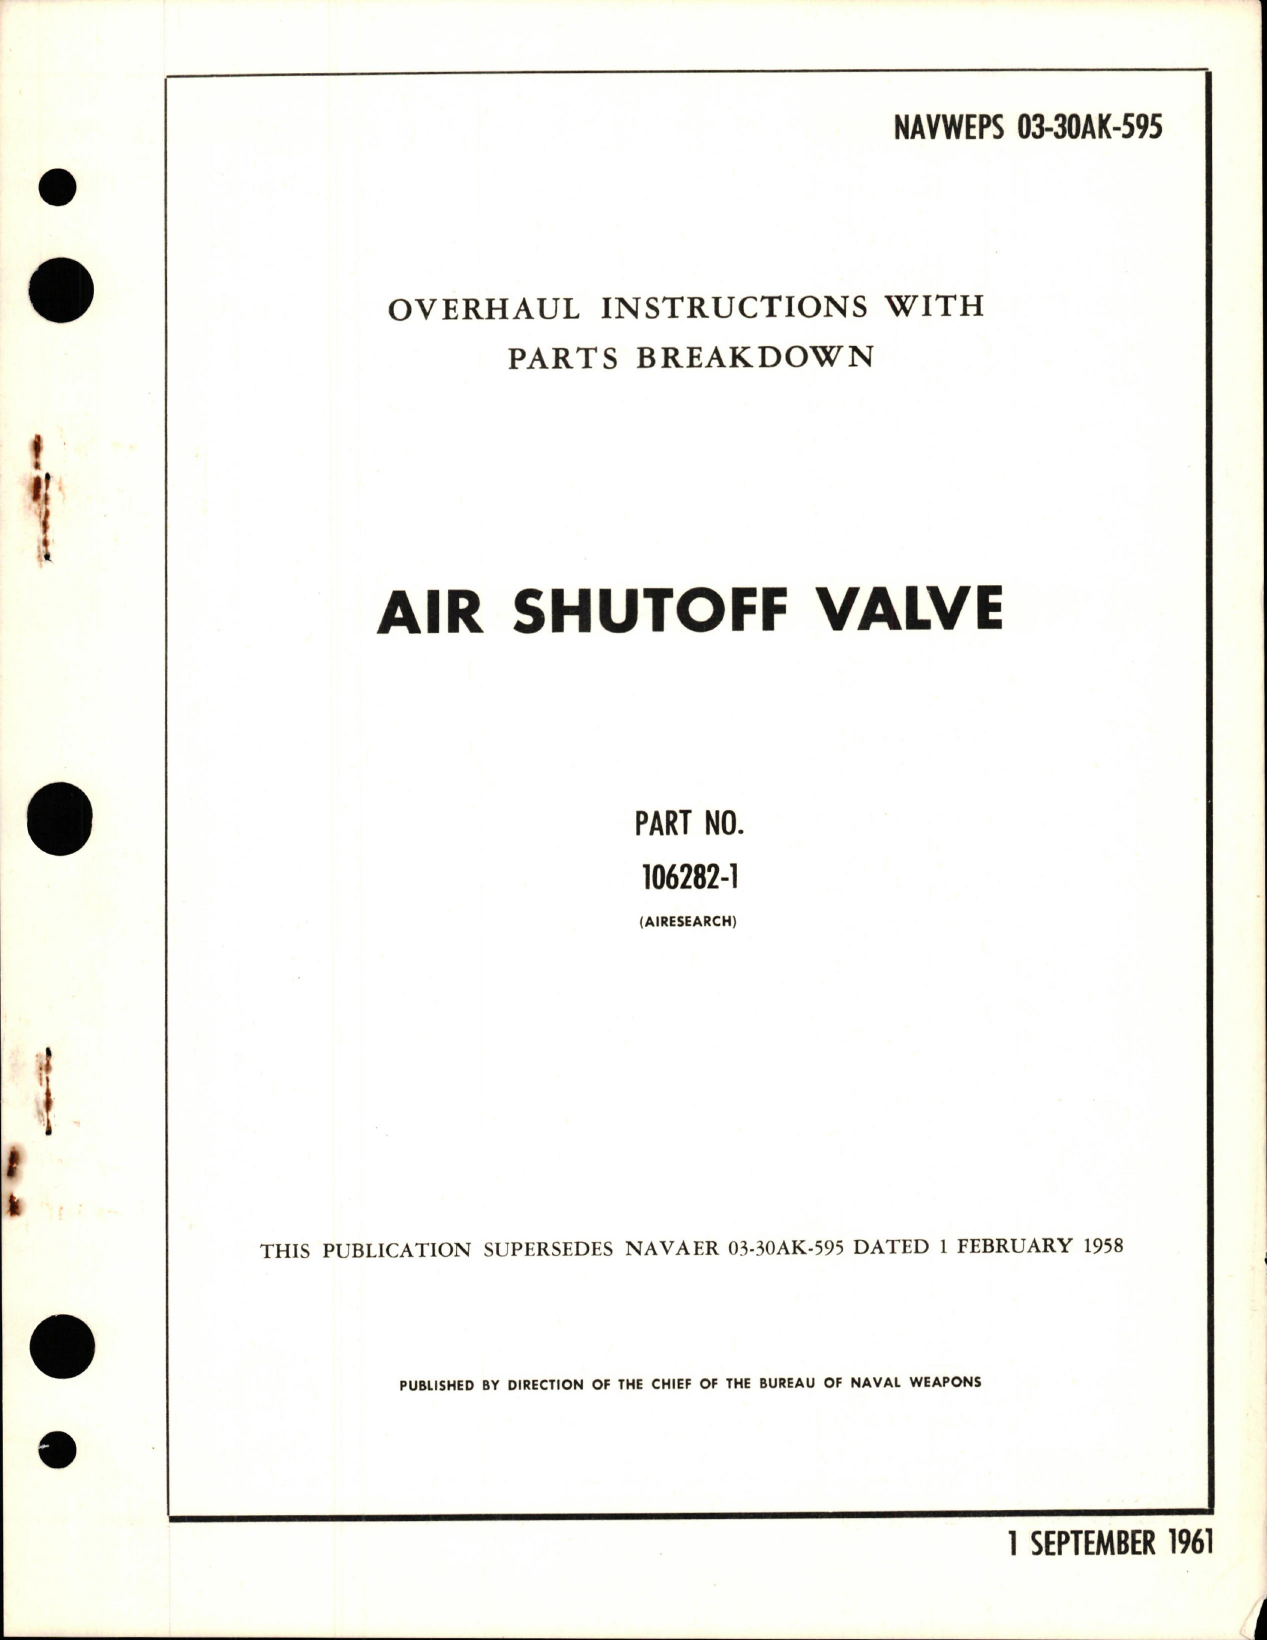 Sample page 1 from AirCorps Library document: Overhaul Instructions with Parts Breakdown for Air Shutoff Valve - Part 106282-1